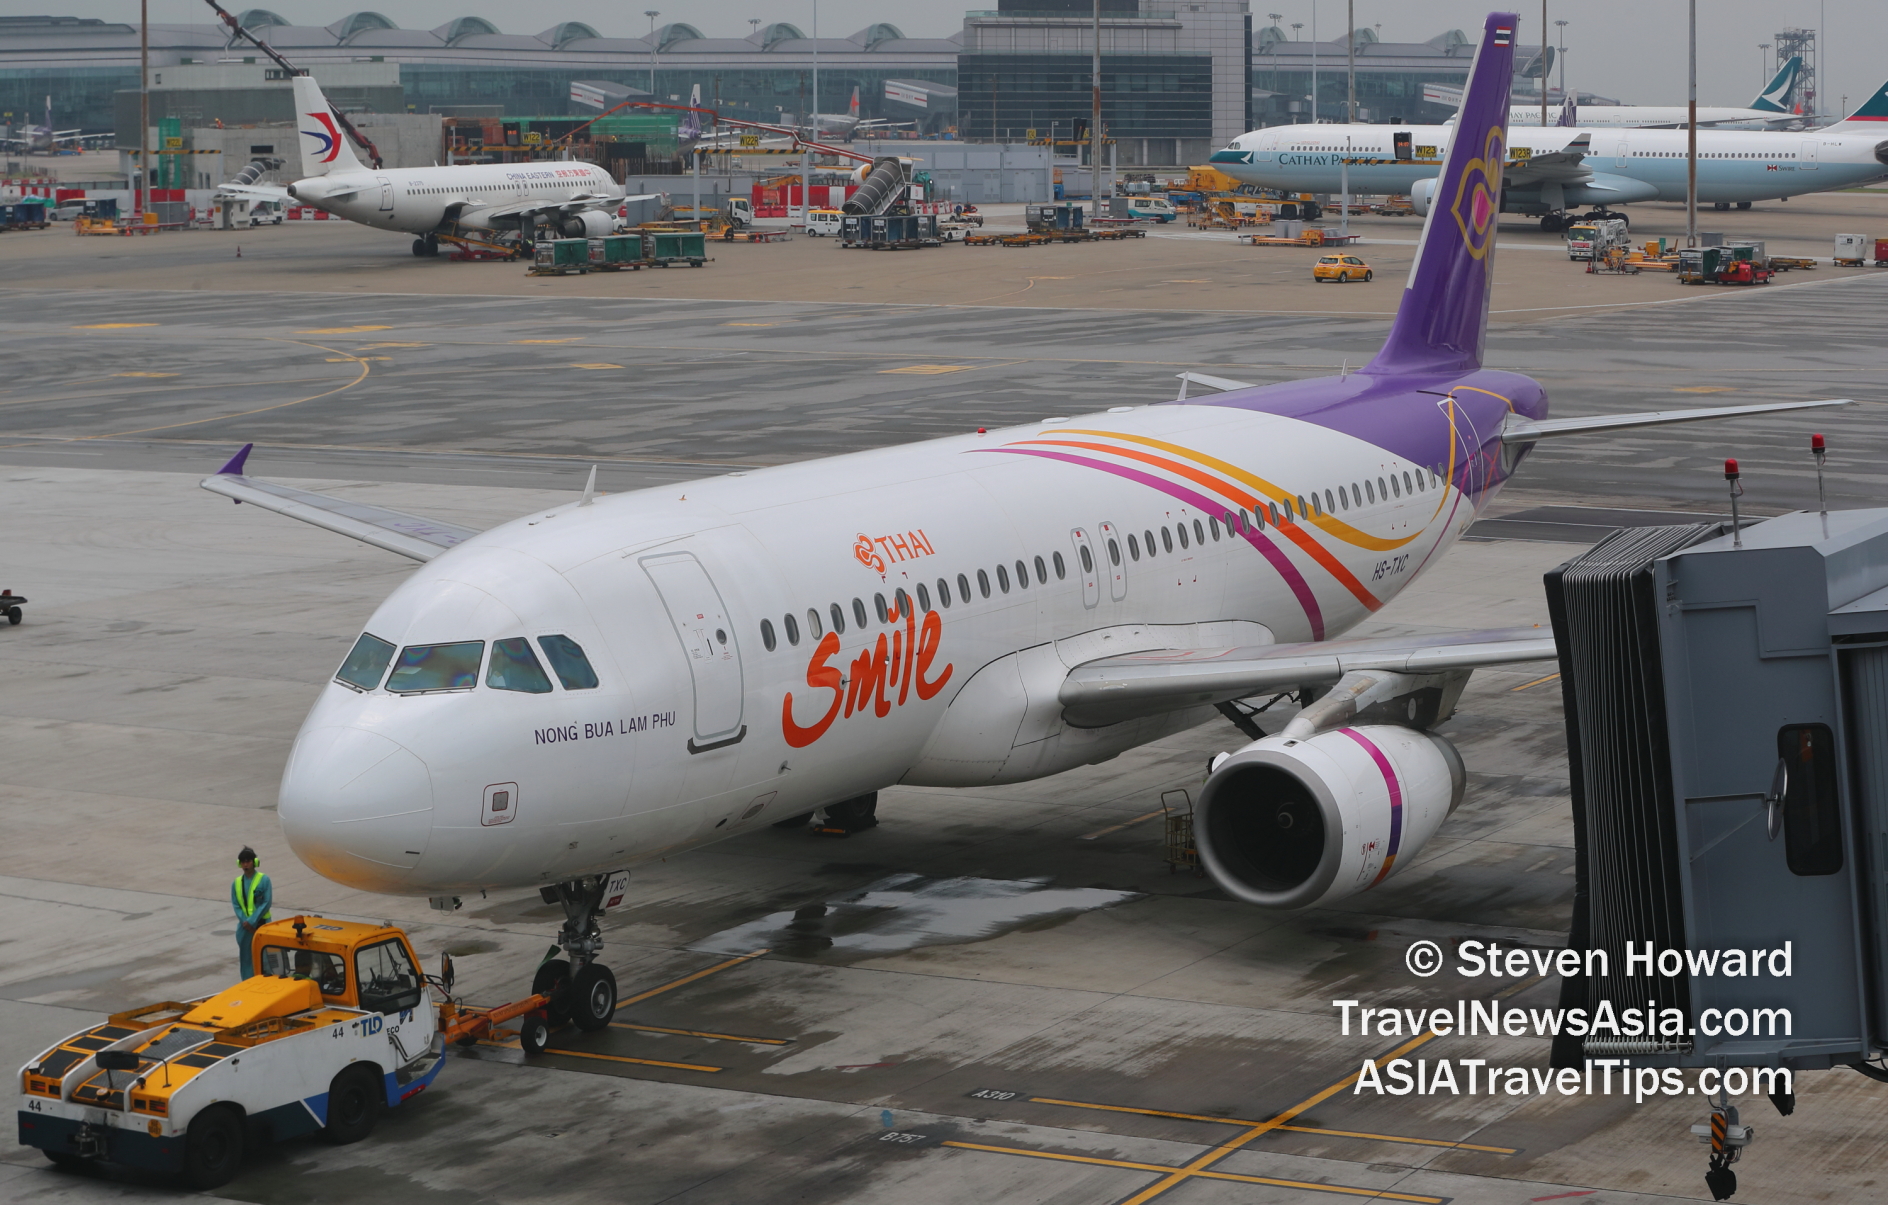 Thai Smile A320 reg: HS-TXC at HKIA. Picture by Steven Howard of TravelNewsAsia.com Click to enlarge.